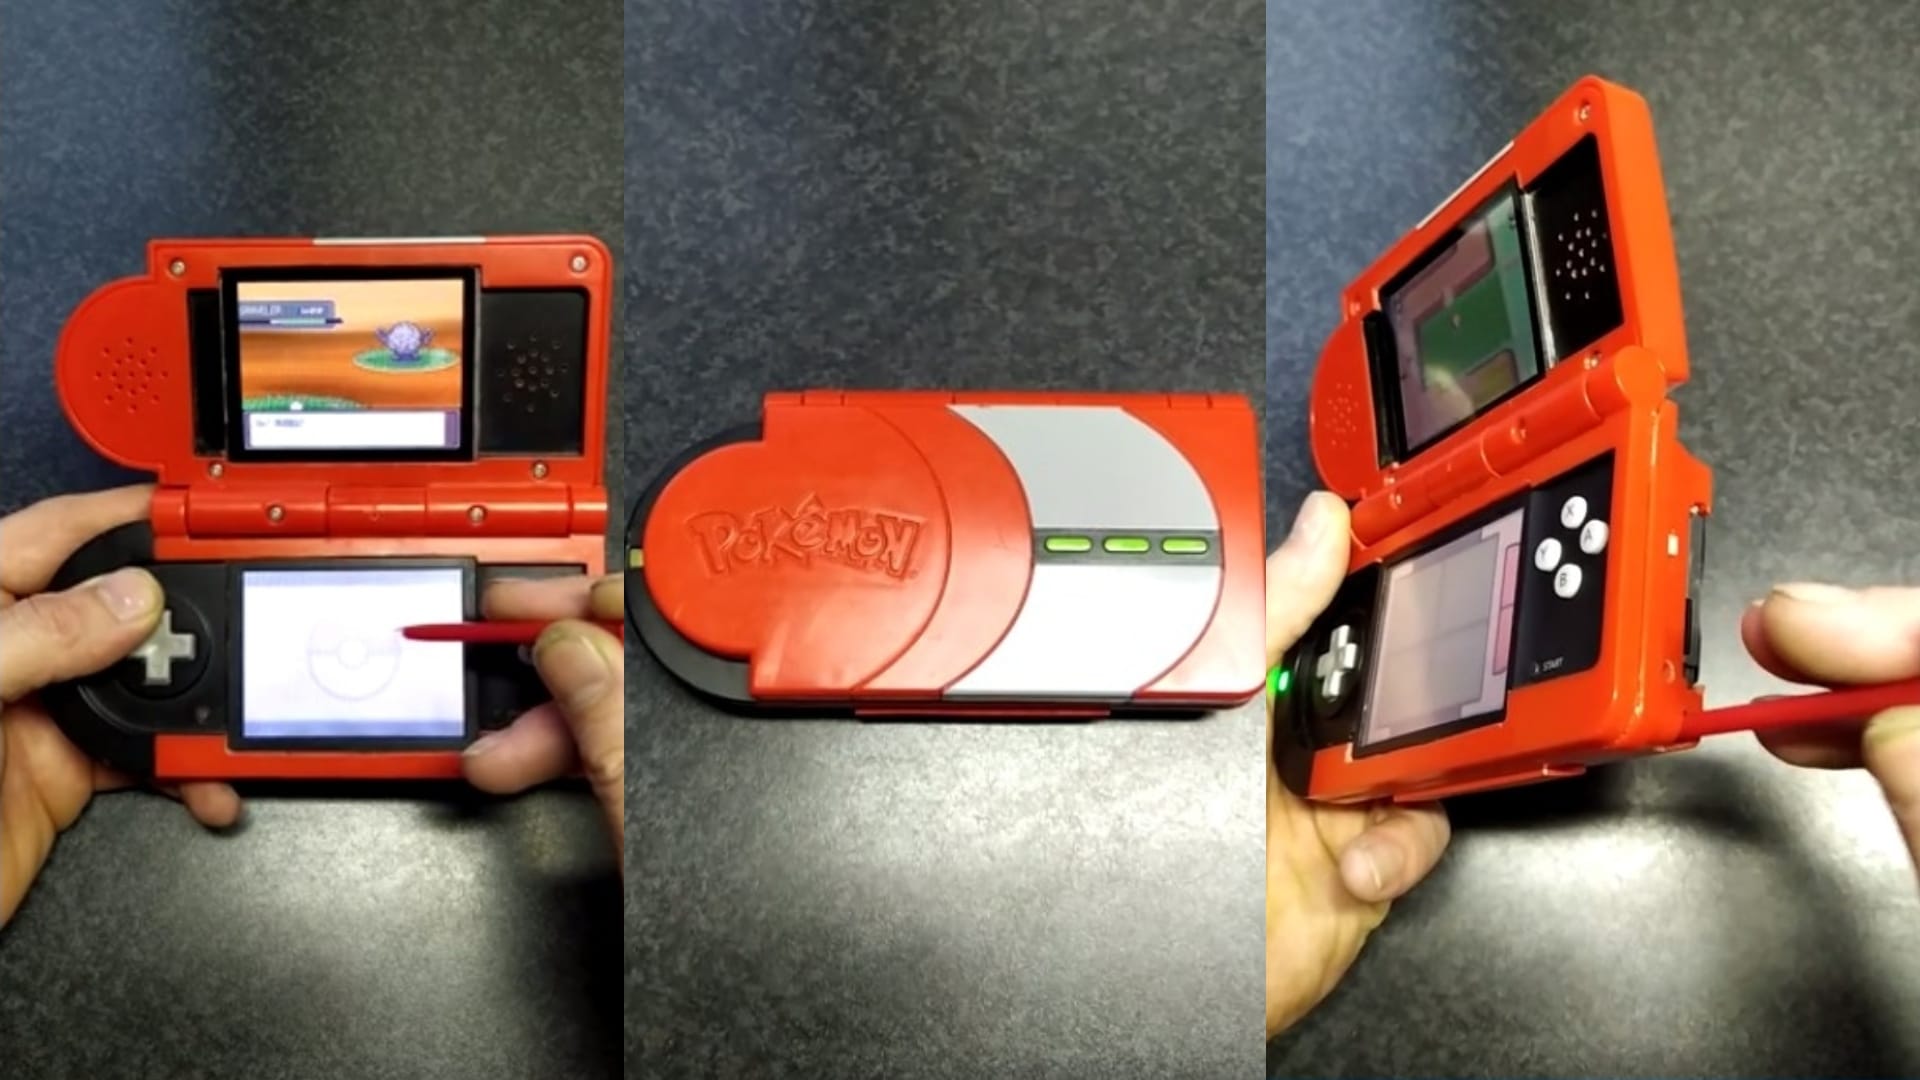 pokemon-played-in-a-real-pokedex-nintendo-ds-GamersRD